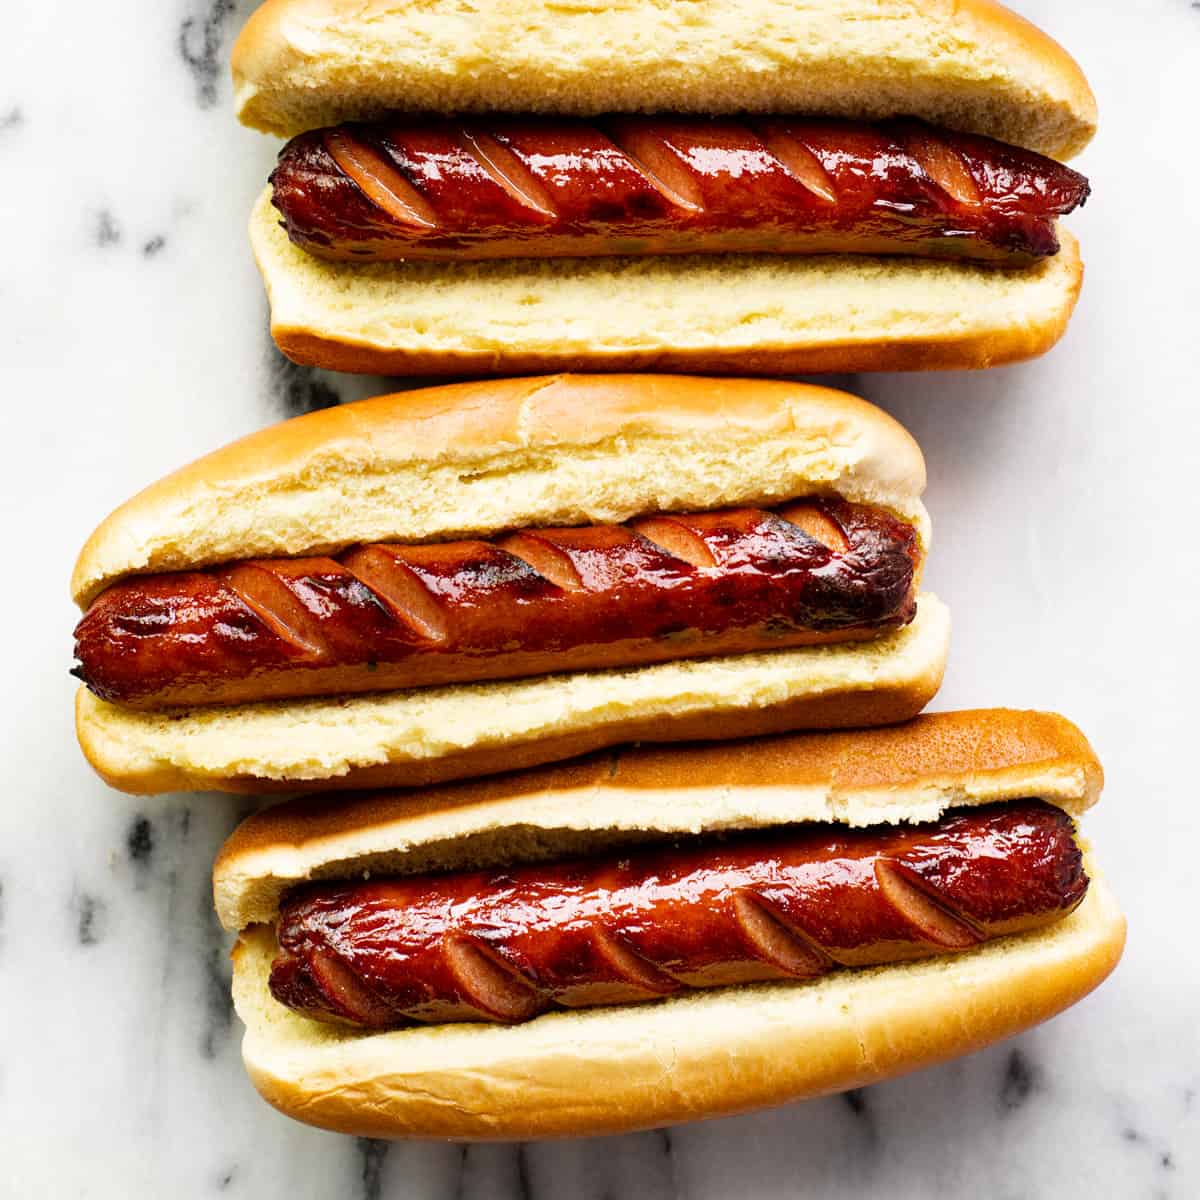 How Long Do You Grill Your Hot Dog?